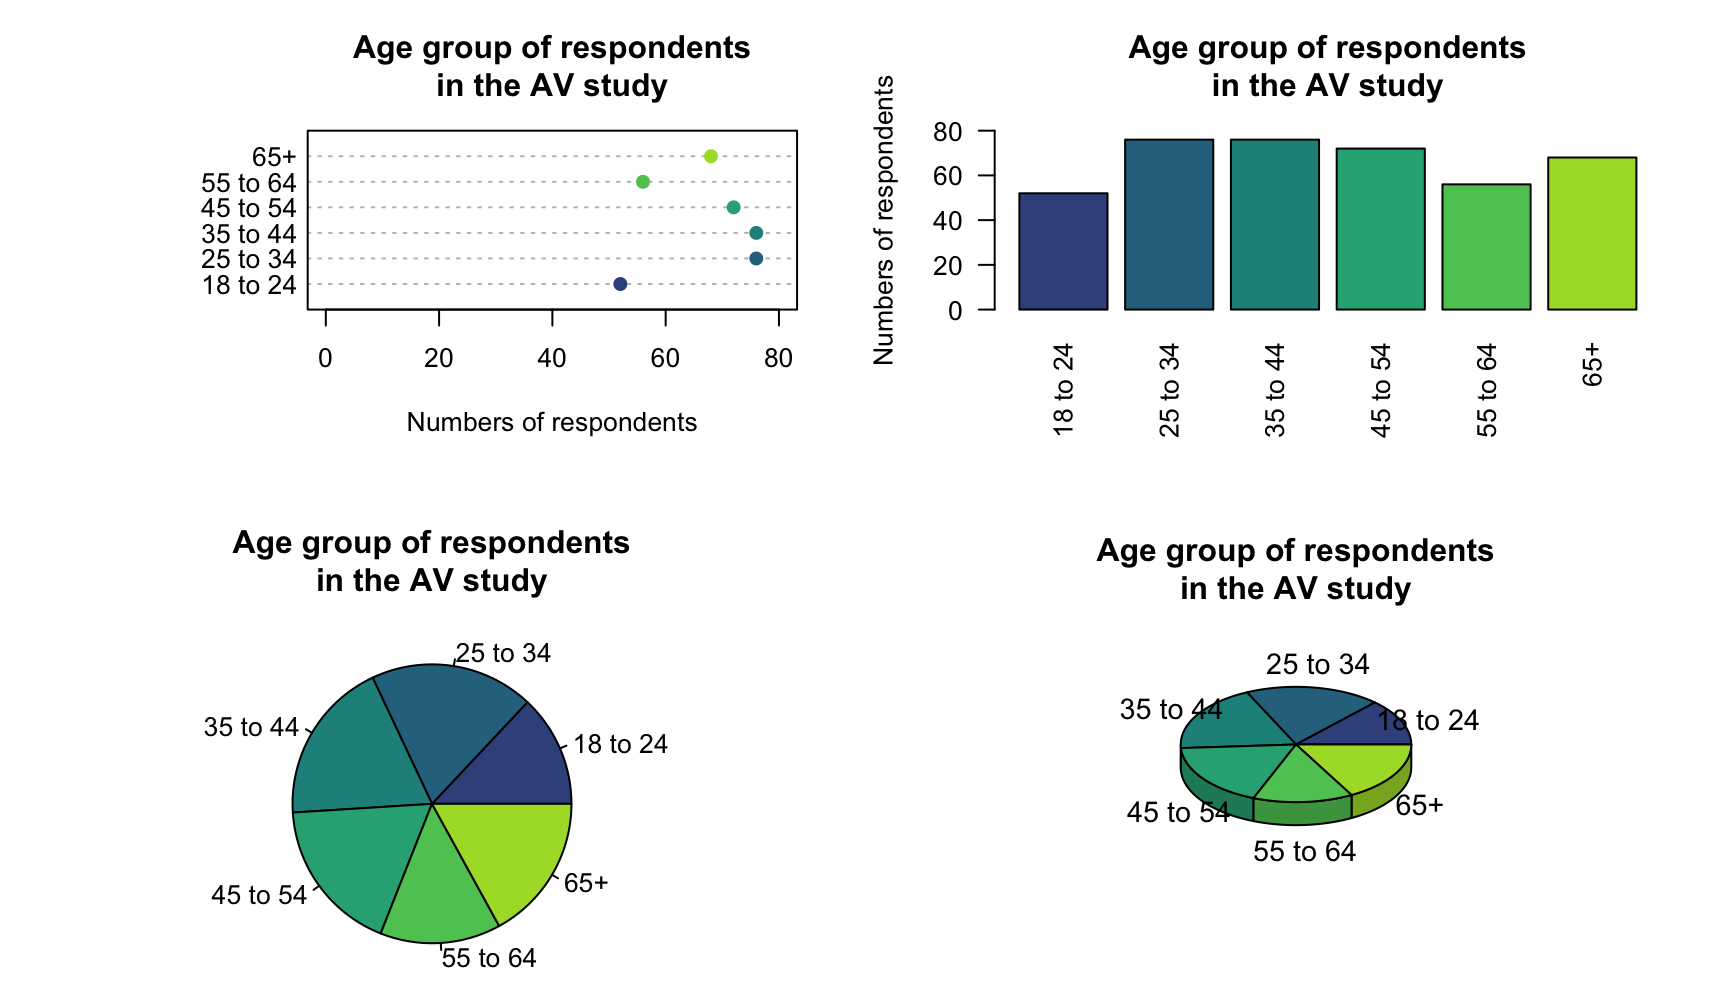 The age group of respondents in the AV study. All the graphs present the same data.